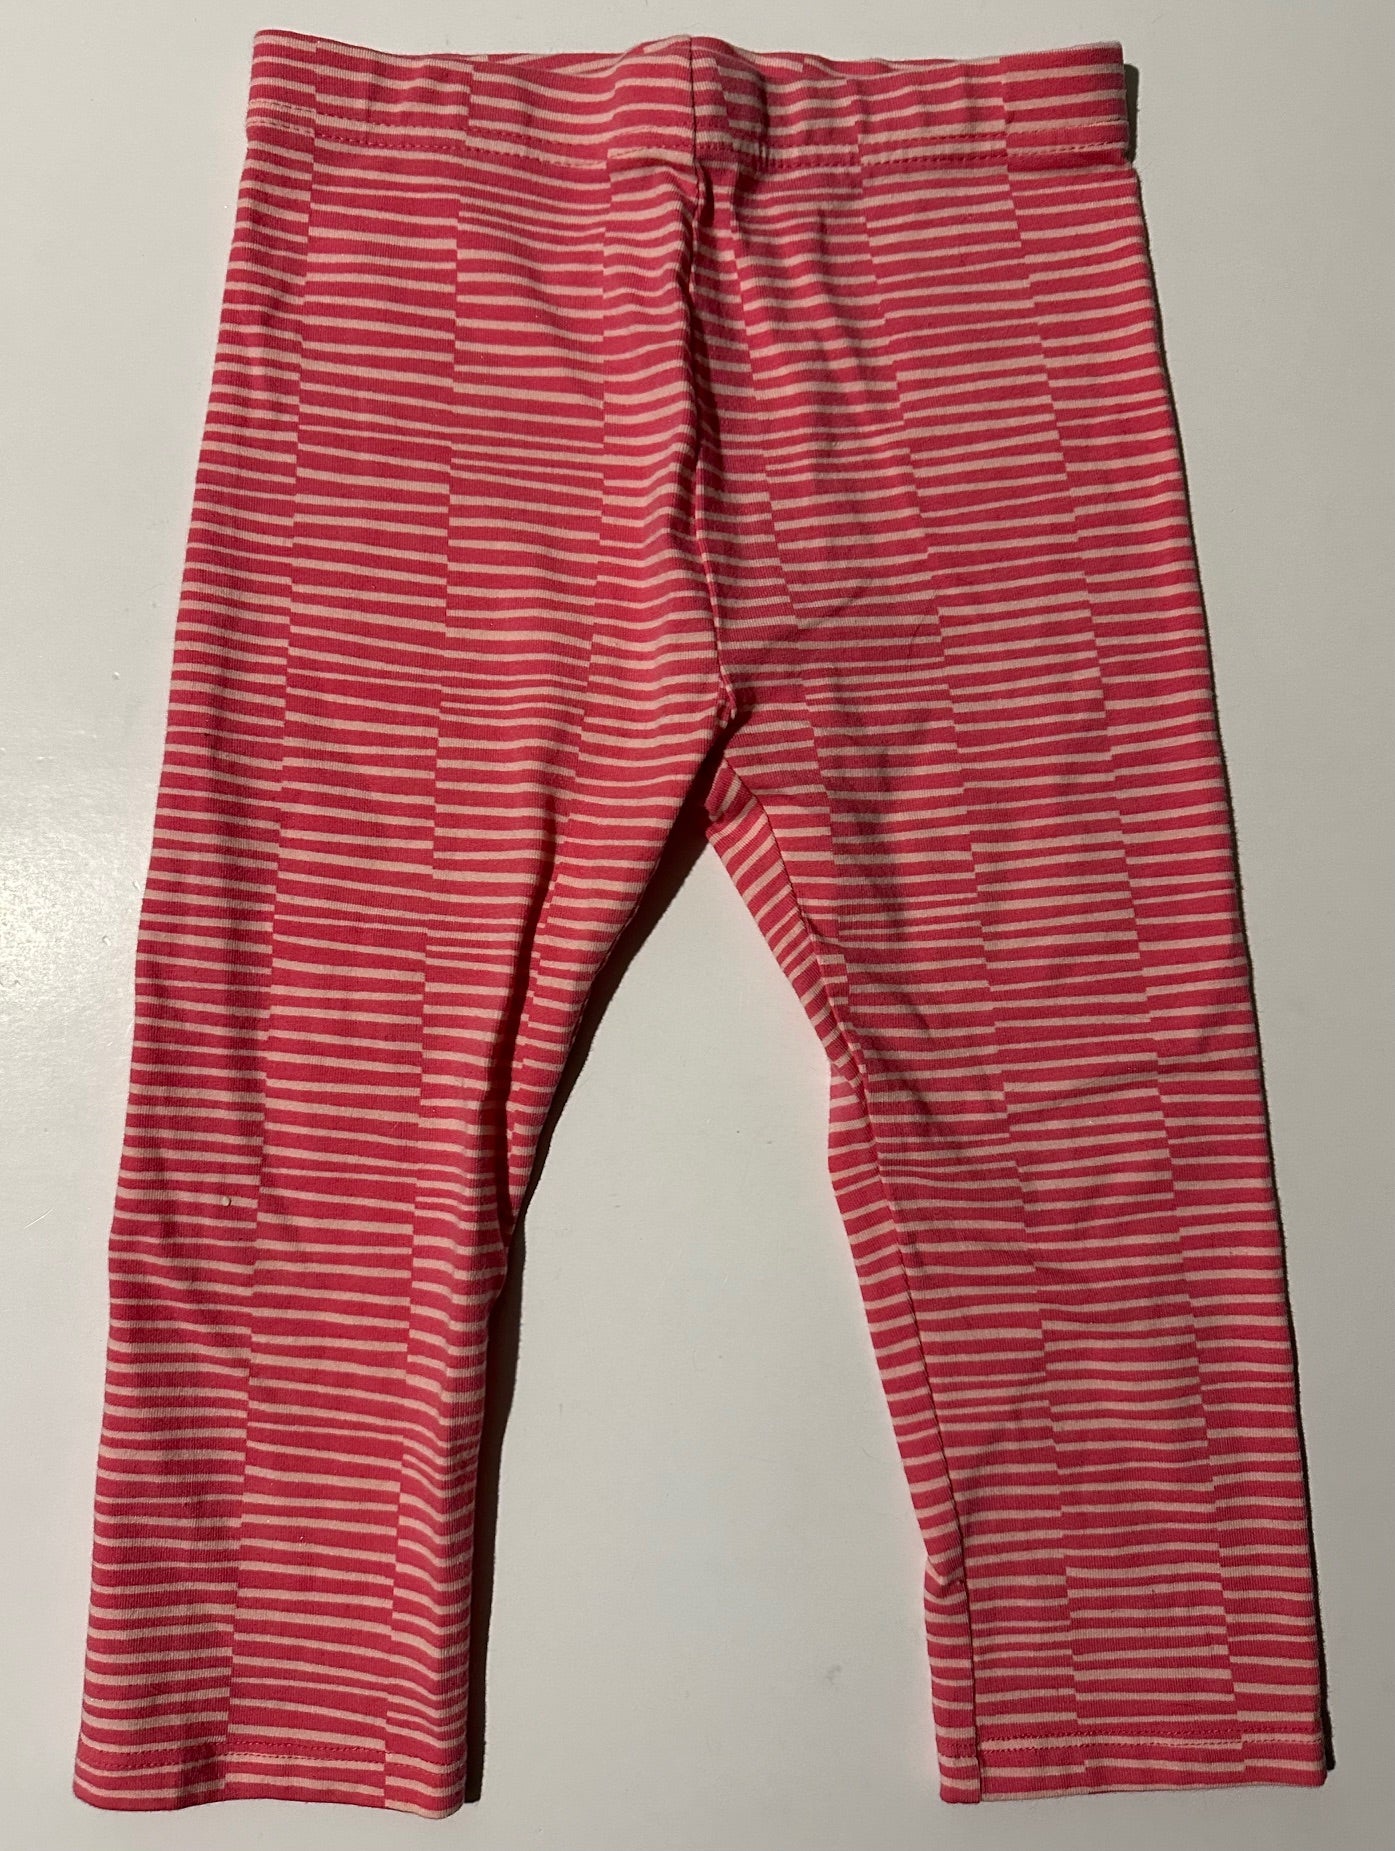 George, Pink Patterned Leggings - Size Small (6) – Linen for Littles